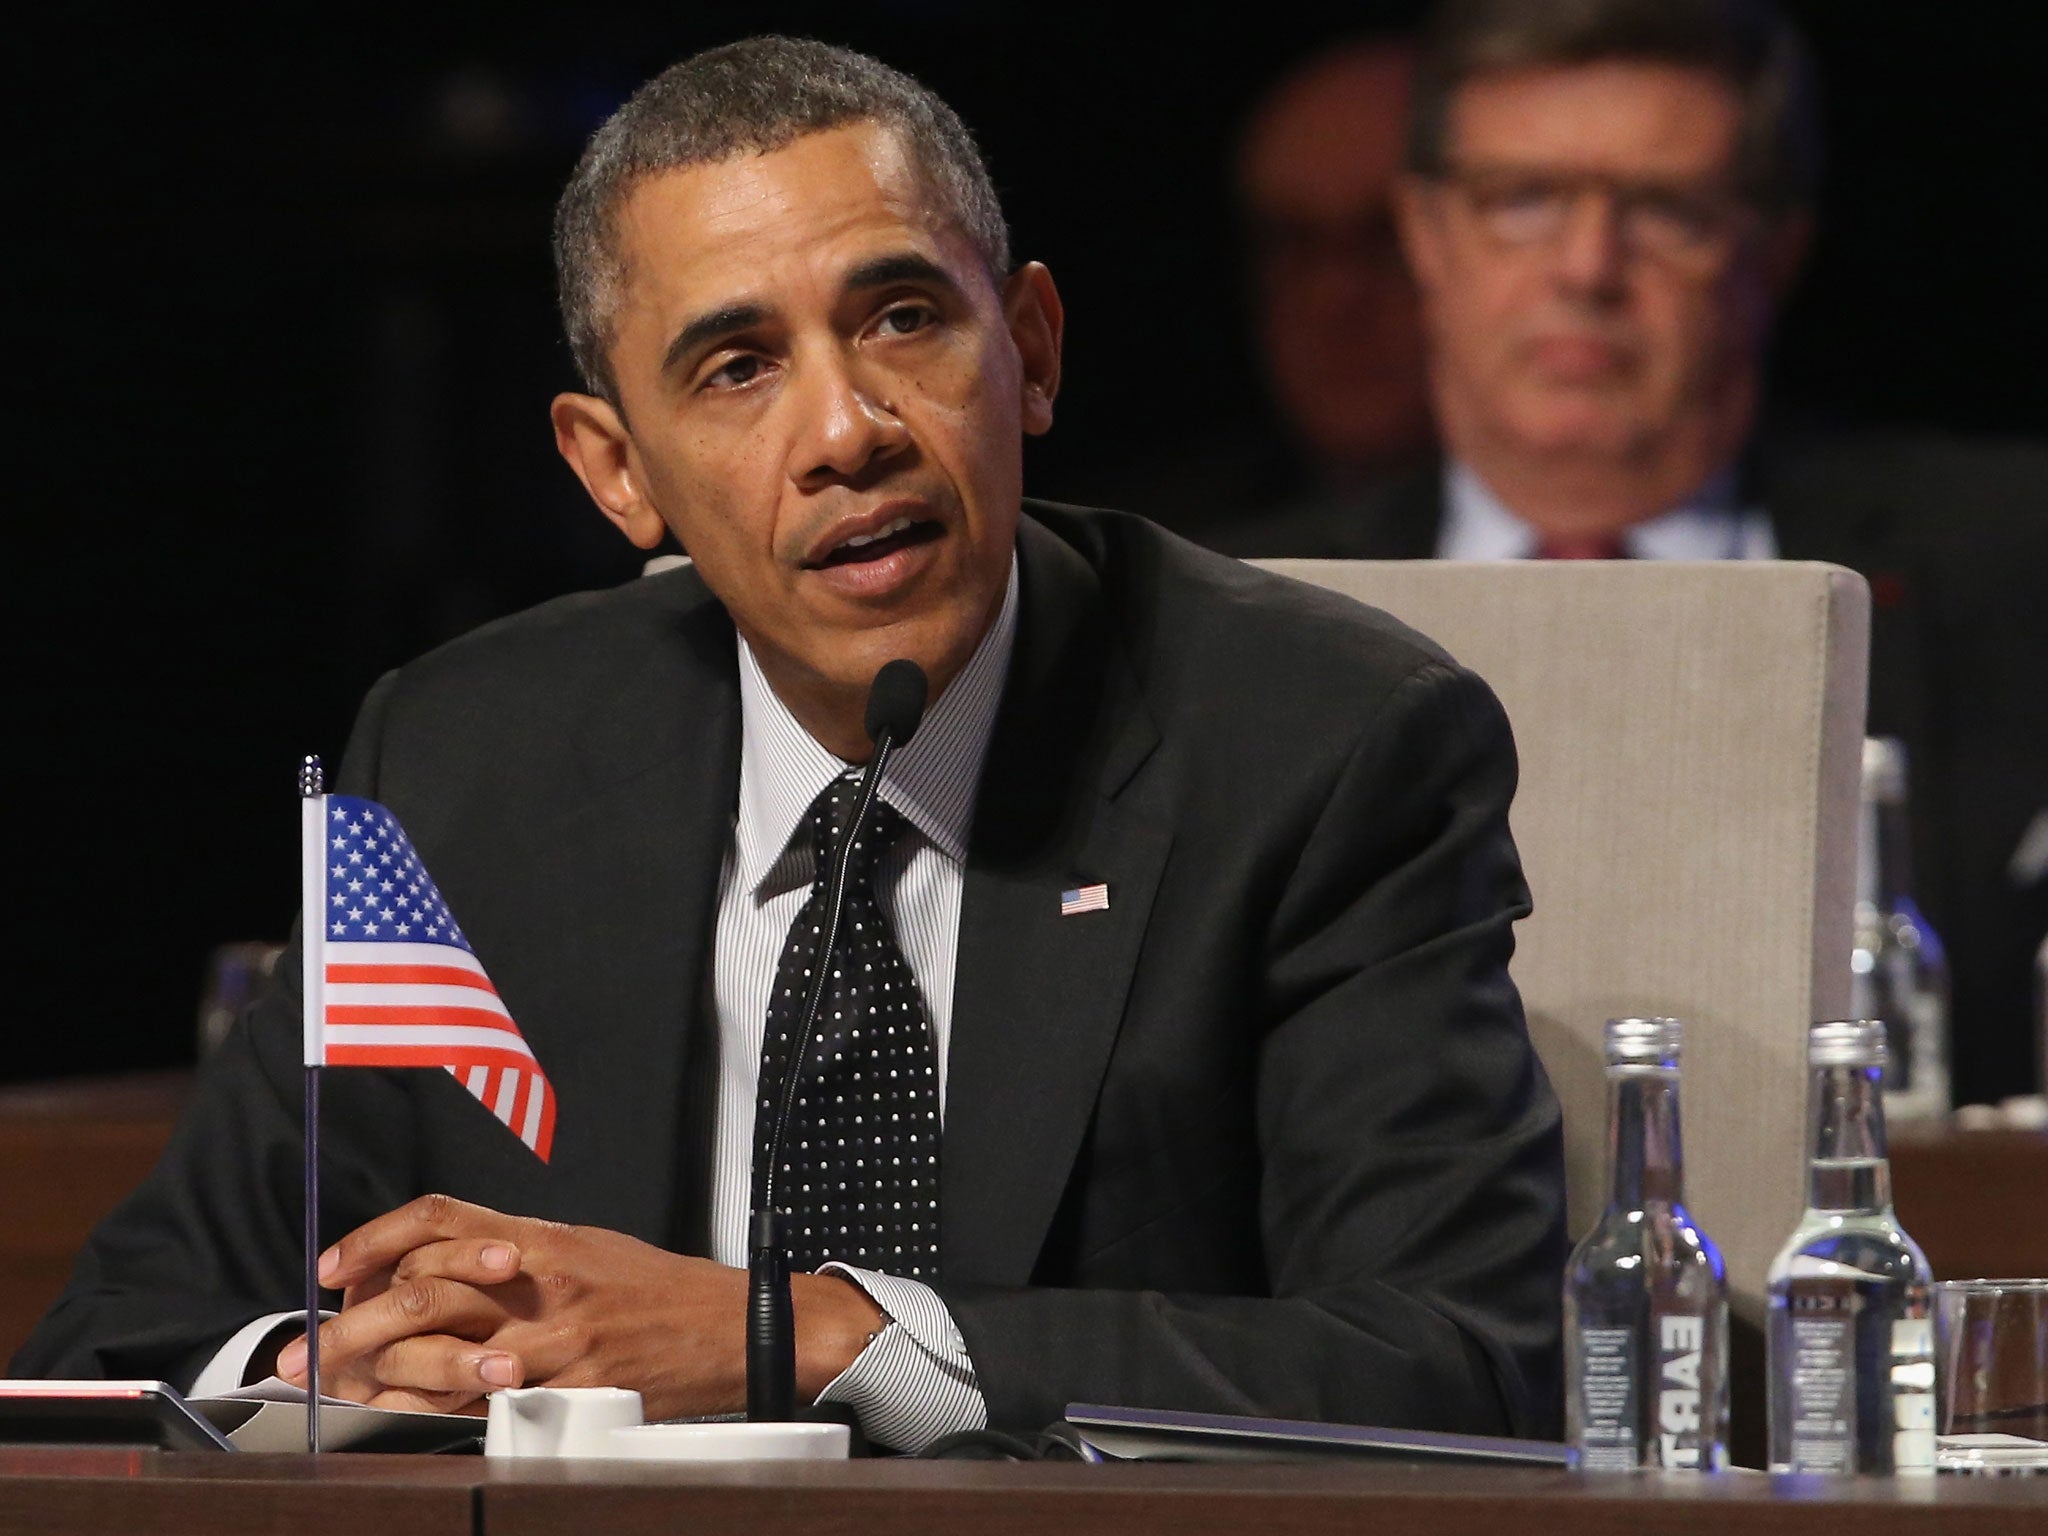 President Barack Obama speaks at the closing session of the 2014 Nuclear Security Summit on March 25, 2014 in The Hague